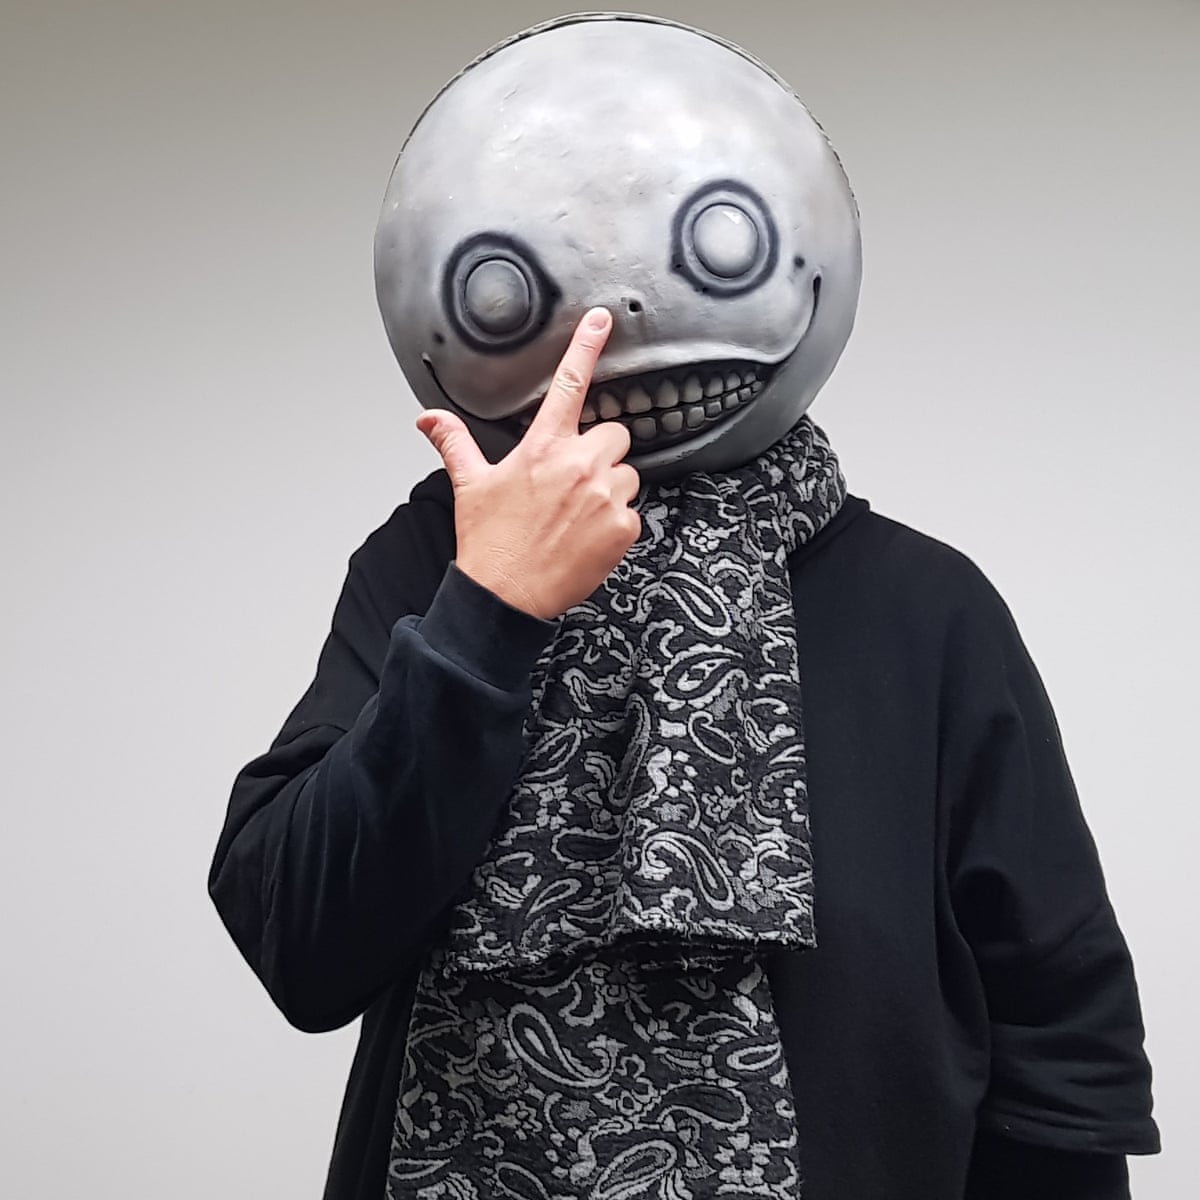 Yoko Taro is as famous for his trolls as for his genius